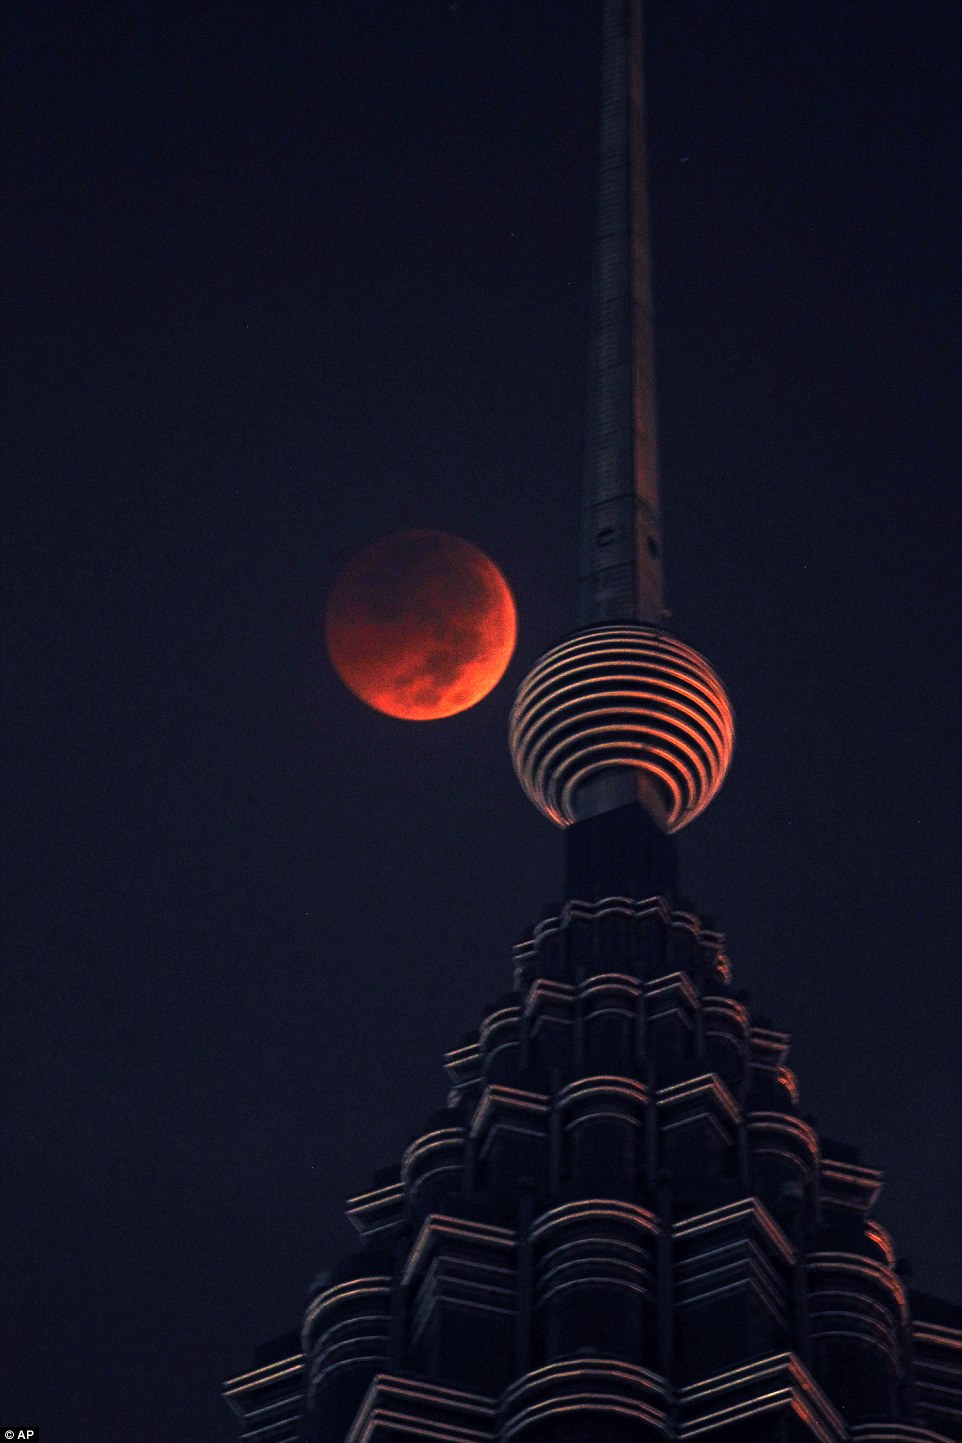 A full Blood Moon sets over Petronas Twin Tower during the complete lunar eclipse in Kuala Lumpur, Malaysia on Saturday